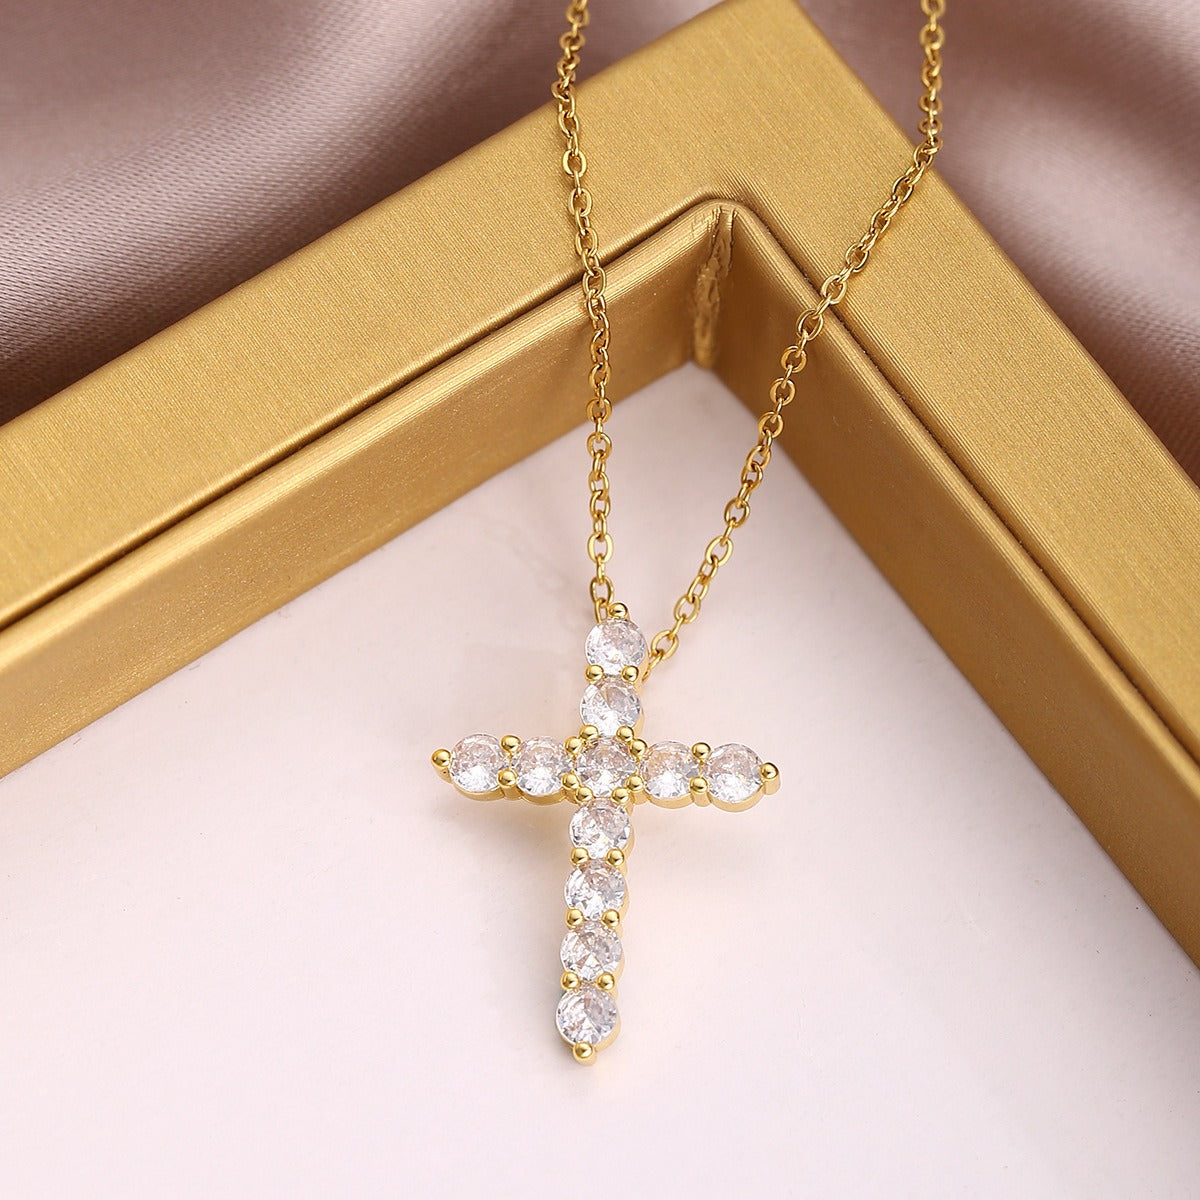 2PCS 14k Gold Plated Cross Pendant with Zircon for Jewelry Making Necklace  DIY Hand Made Bracelet